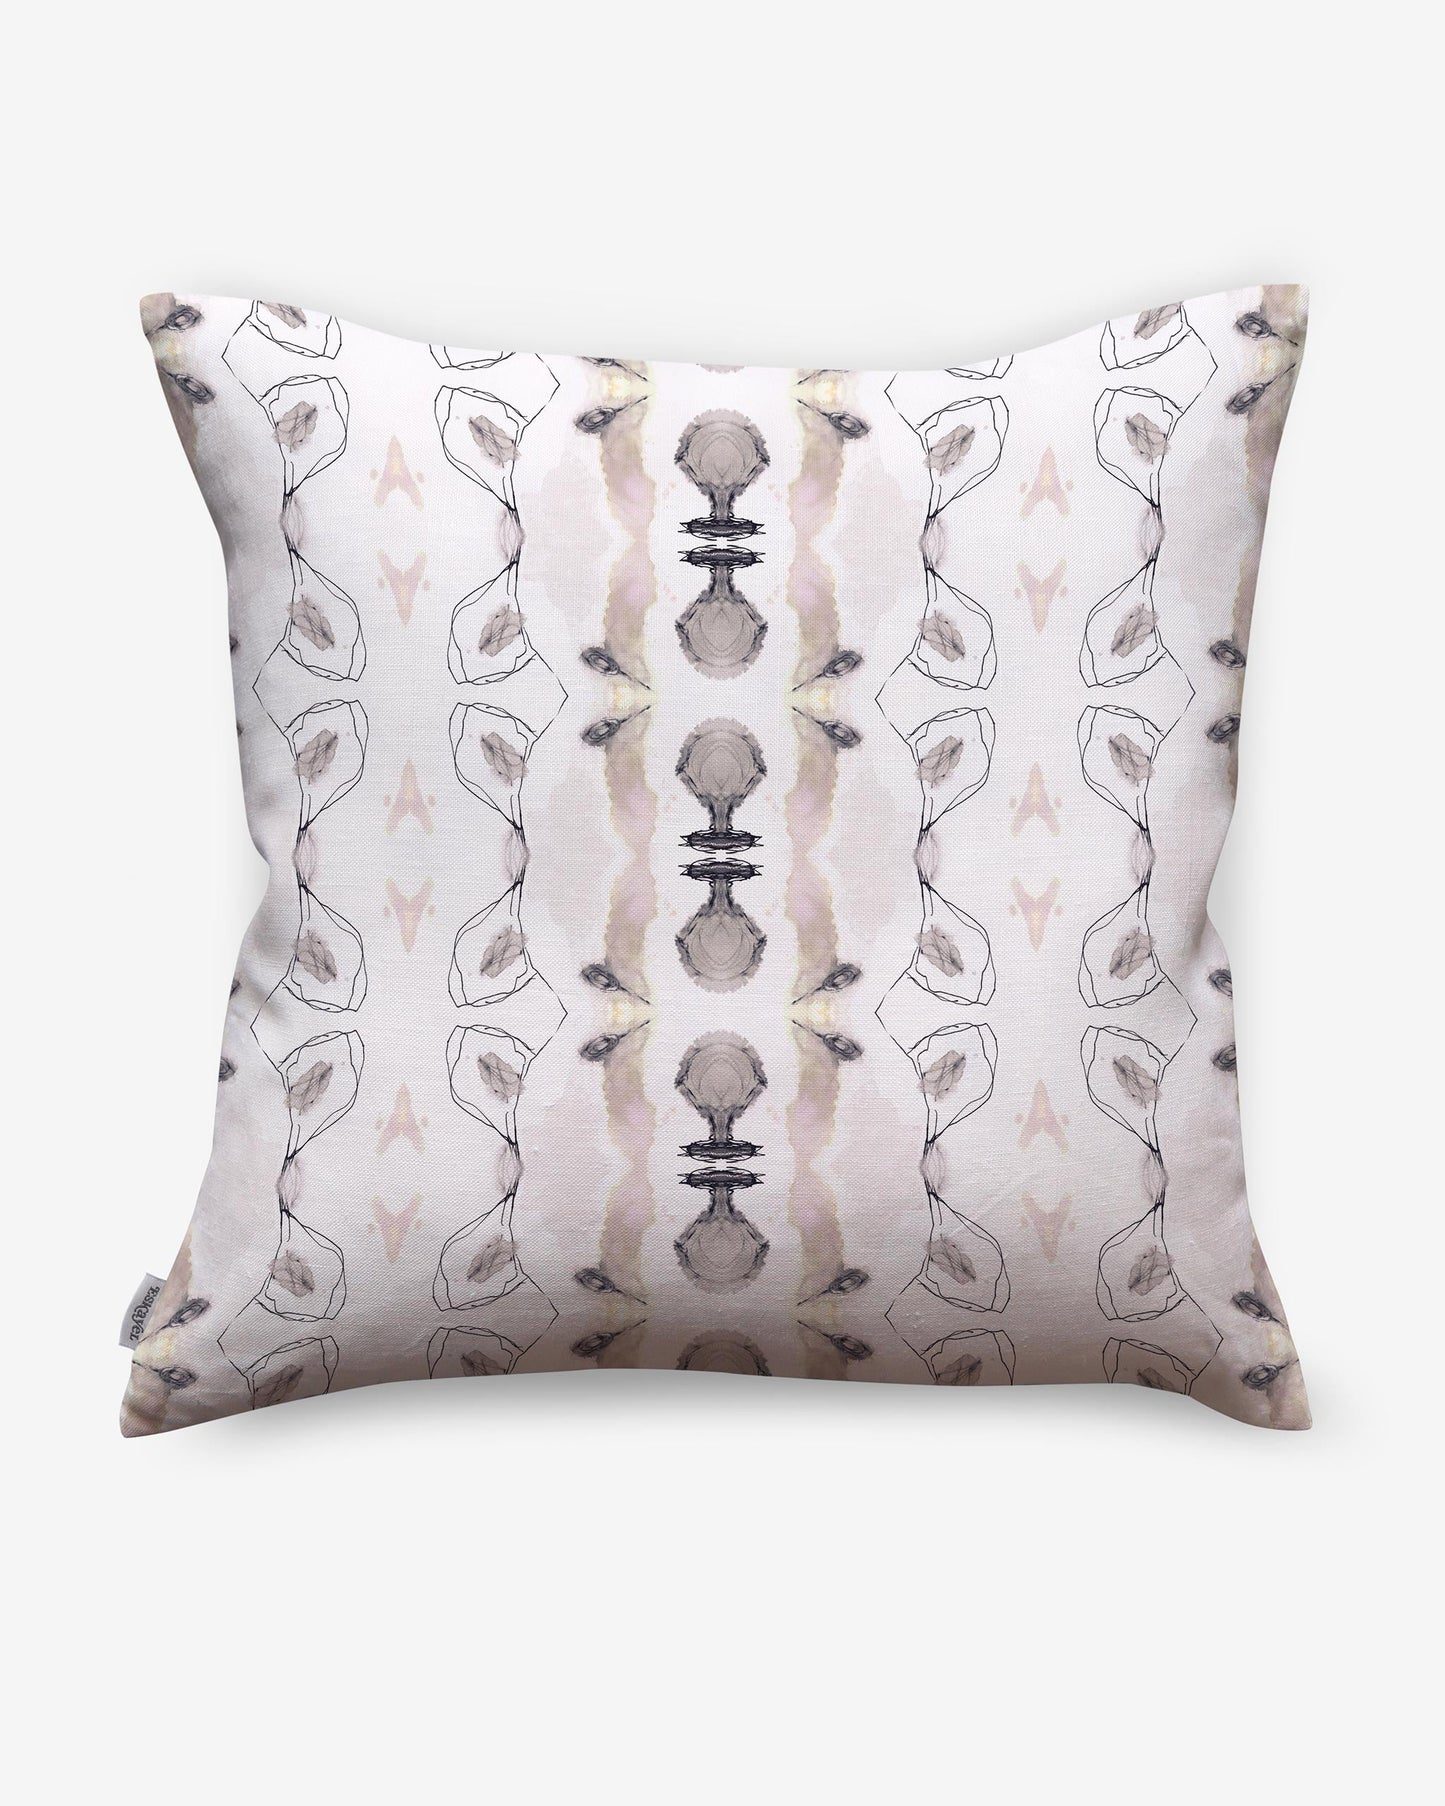 A pillow with a Bali Stripe Outdoor Pillow Sand design made of luxury performance fabric